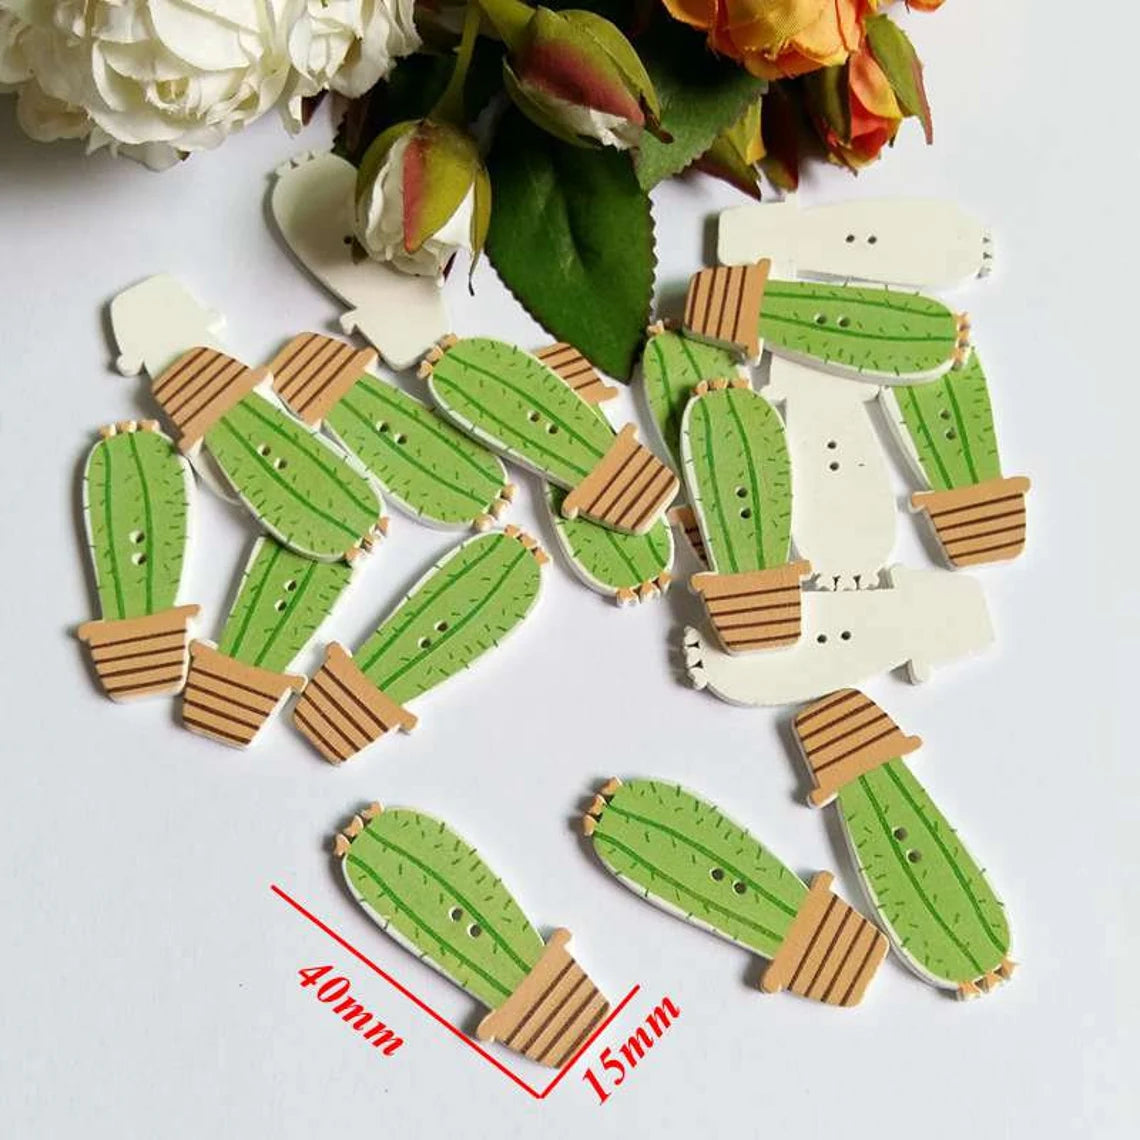 Cute Cactus Wooden Buttons - Set of 6